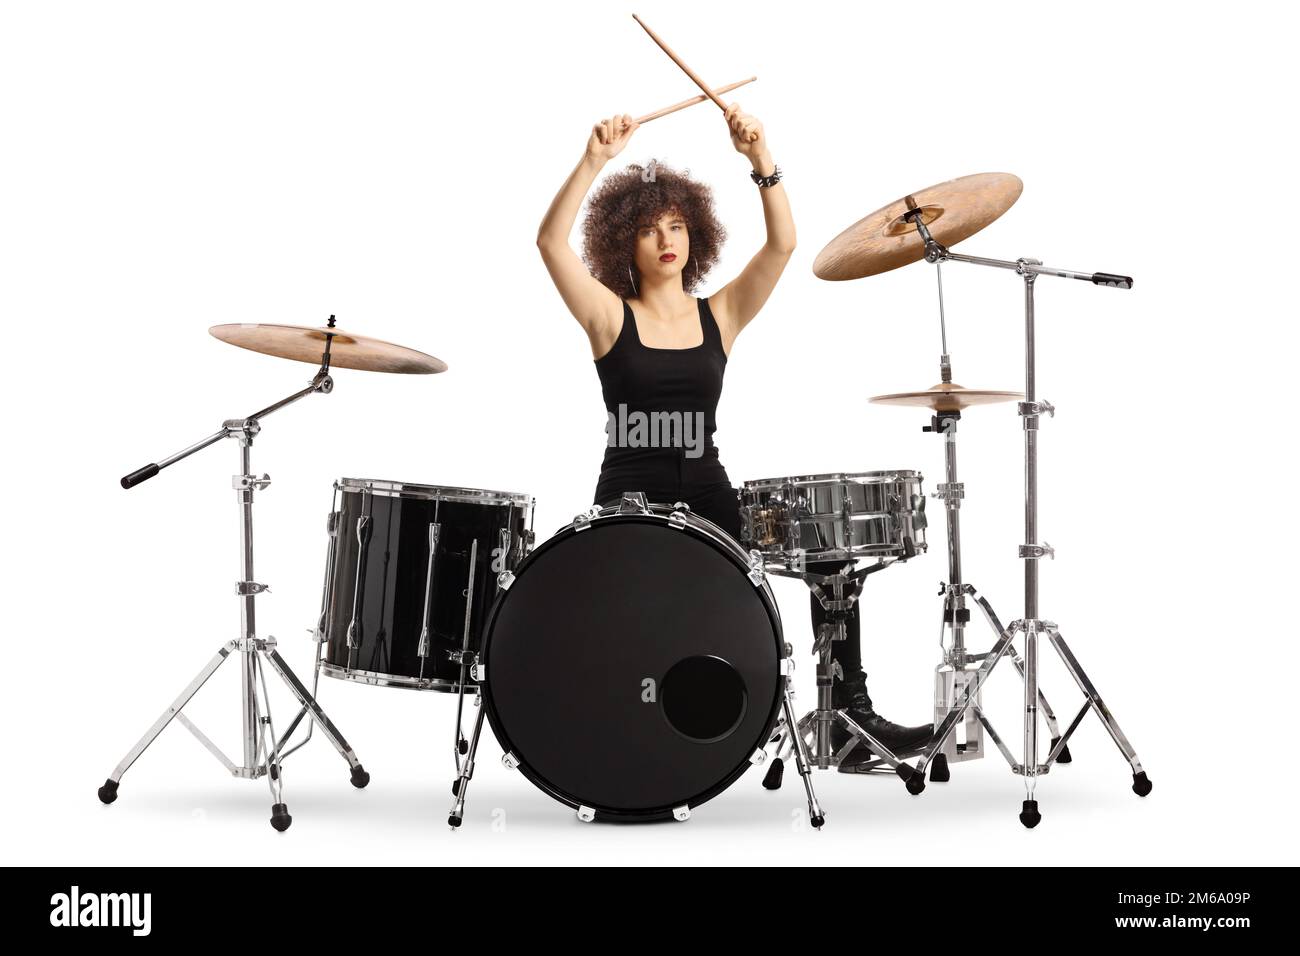 Female drummer lifitng drumsticks isolated on white background Stock Photo